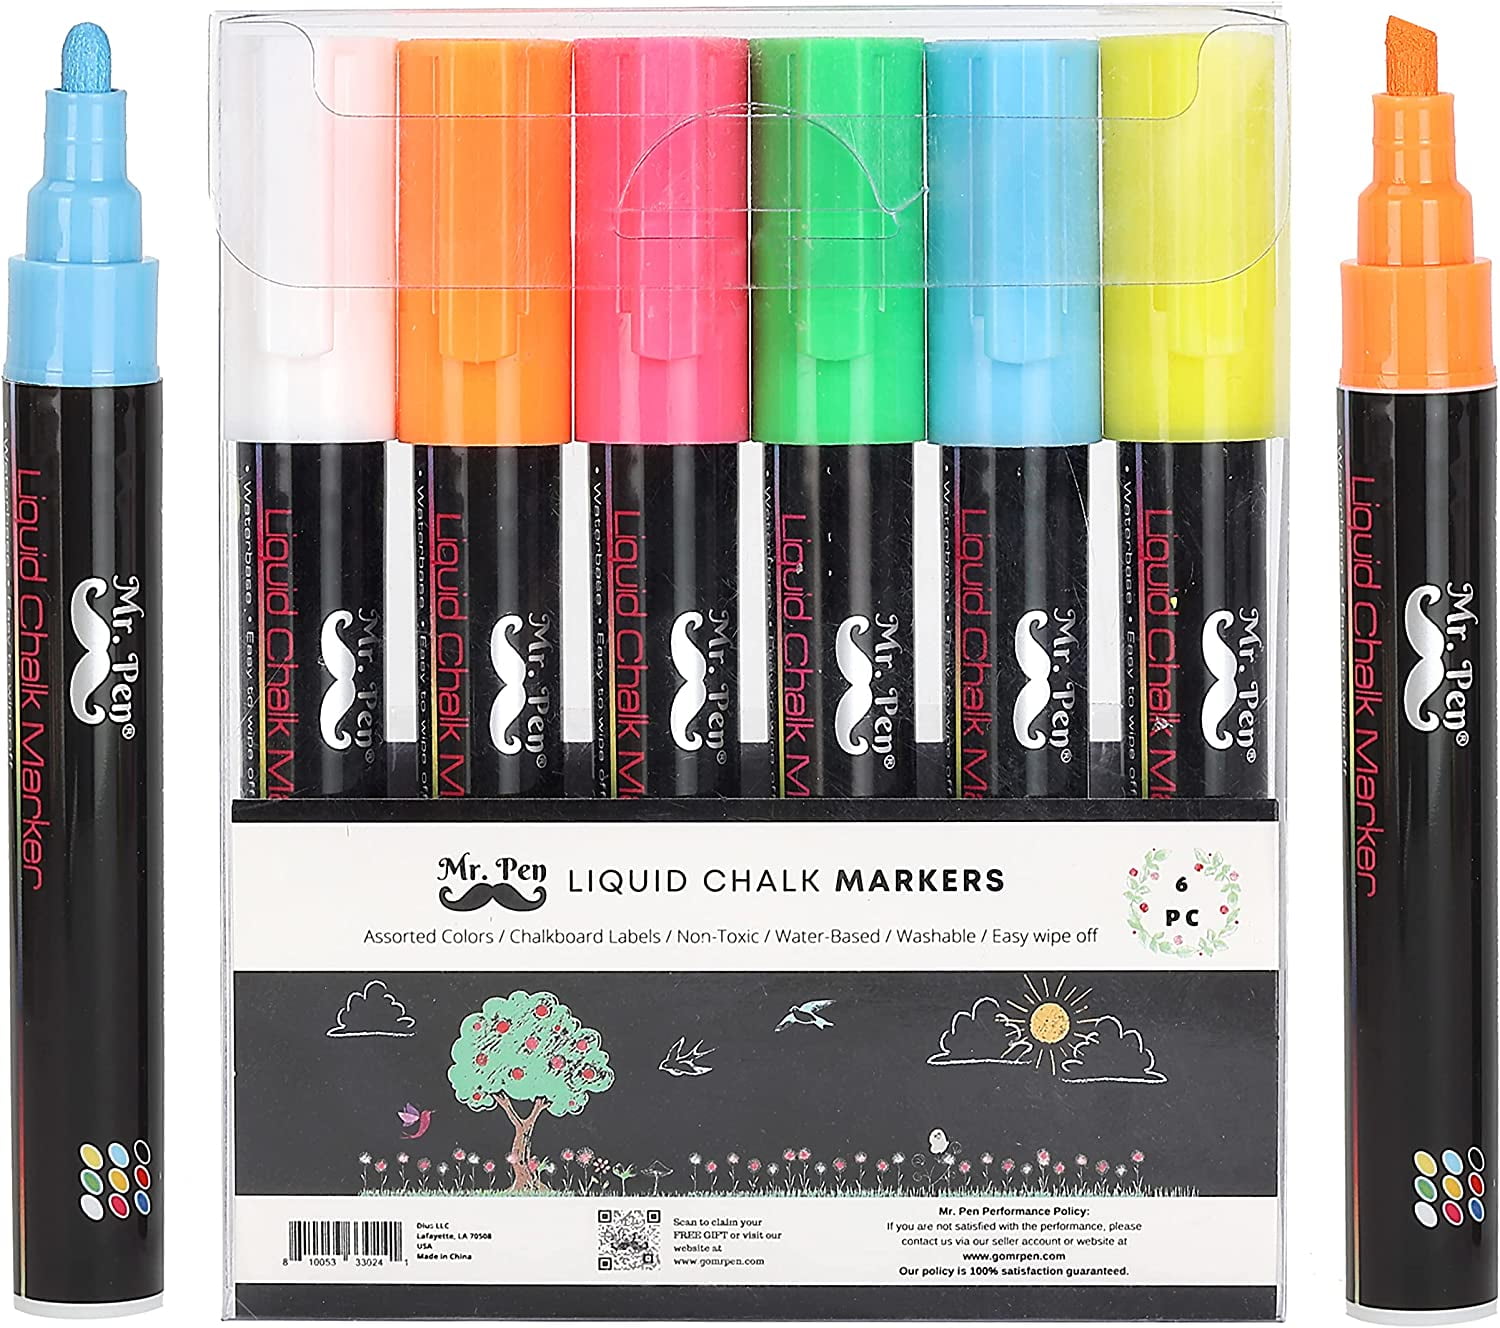 GOTIDEAL Liquid Chalk Markers, 30 colors Premium Window Chalkboard Neon  Pens, Including 4 Metallic Colors, Painting and Drawing for Kids and  Adults, Bistro & Restaurant, Wet Erase - Reversible Tip